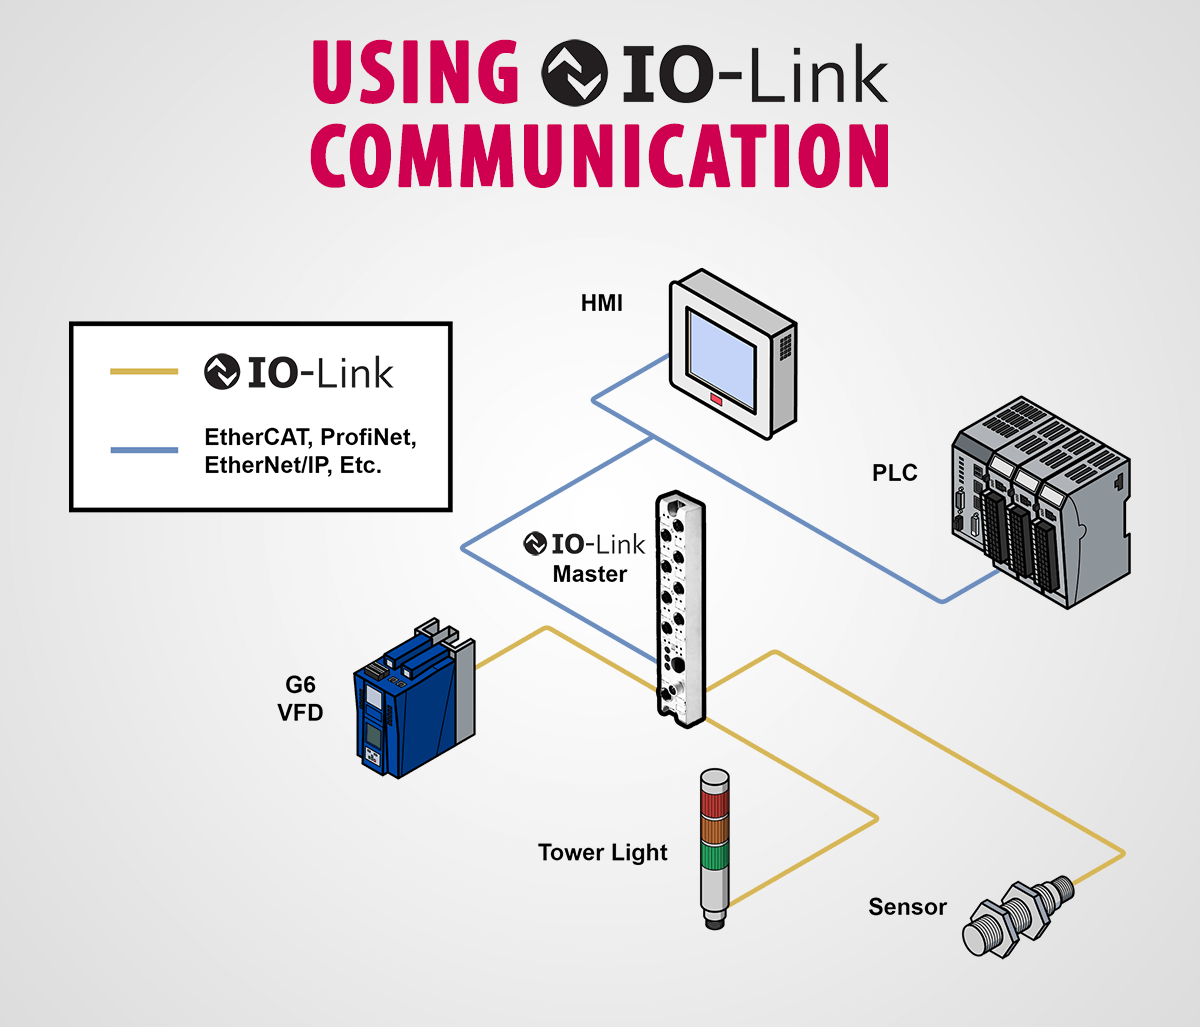 Diagram of an IO-Link system used to link the HMI, PLC, and VFD to a sensor and tower light for safety